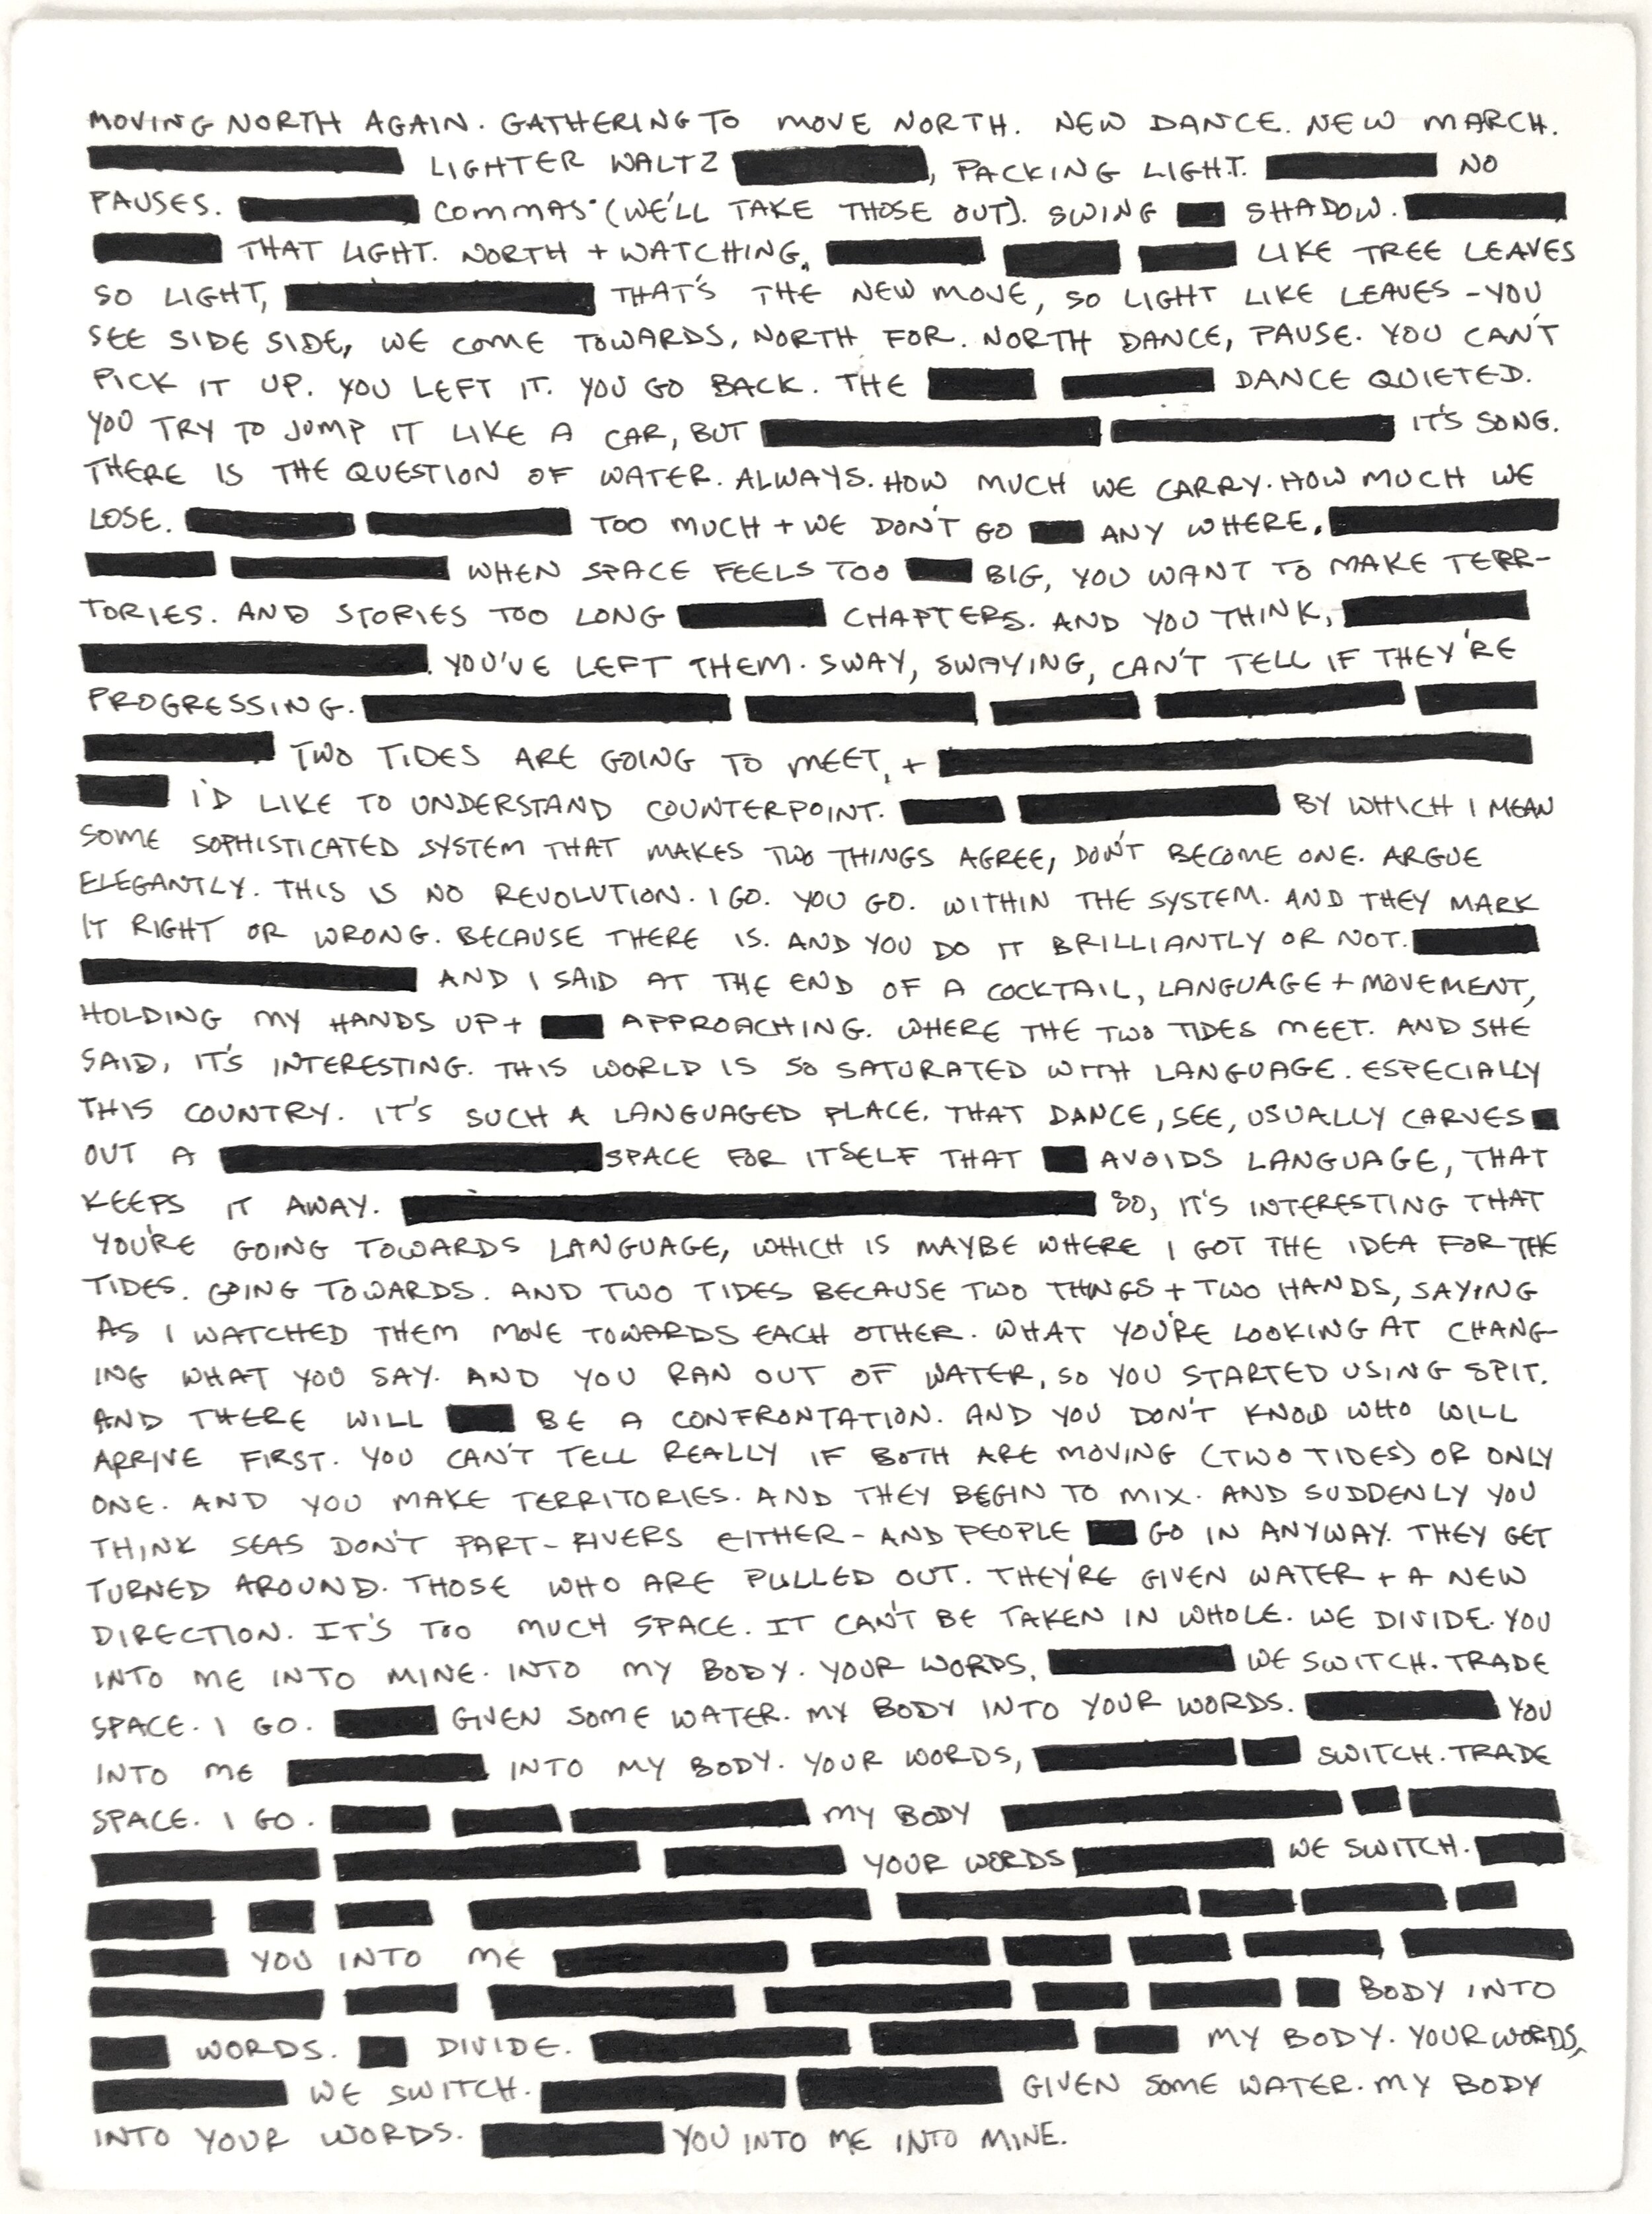 016_Two Tides_Redactions 2019.JPG